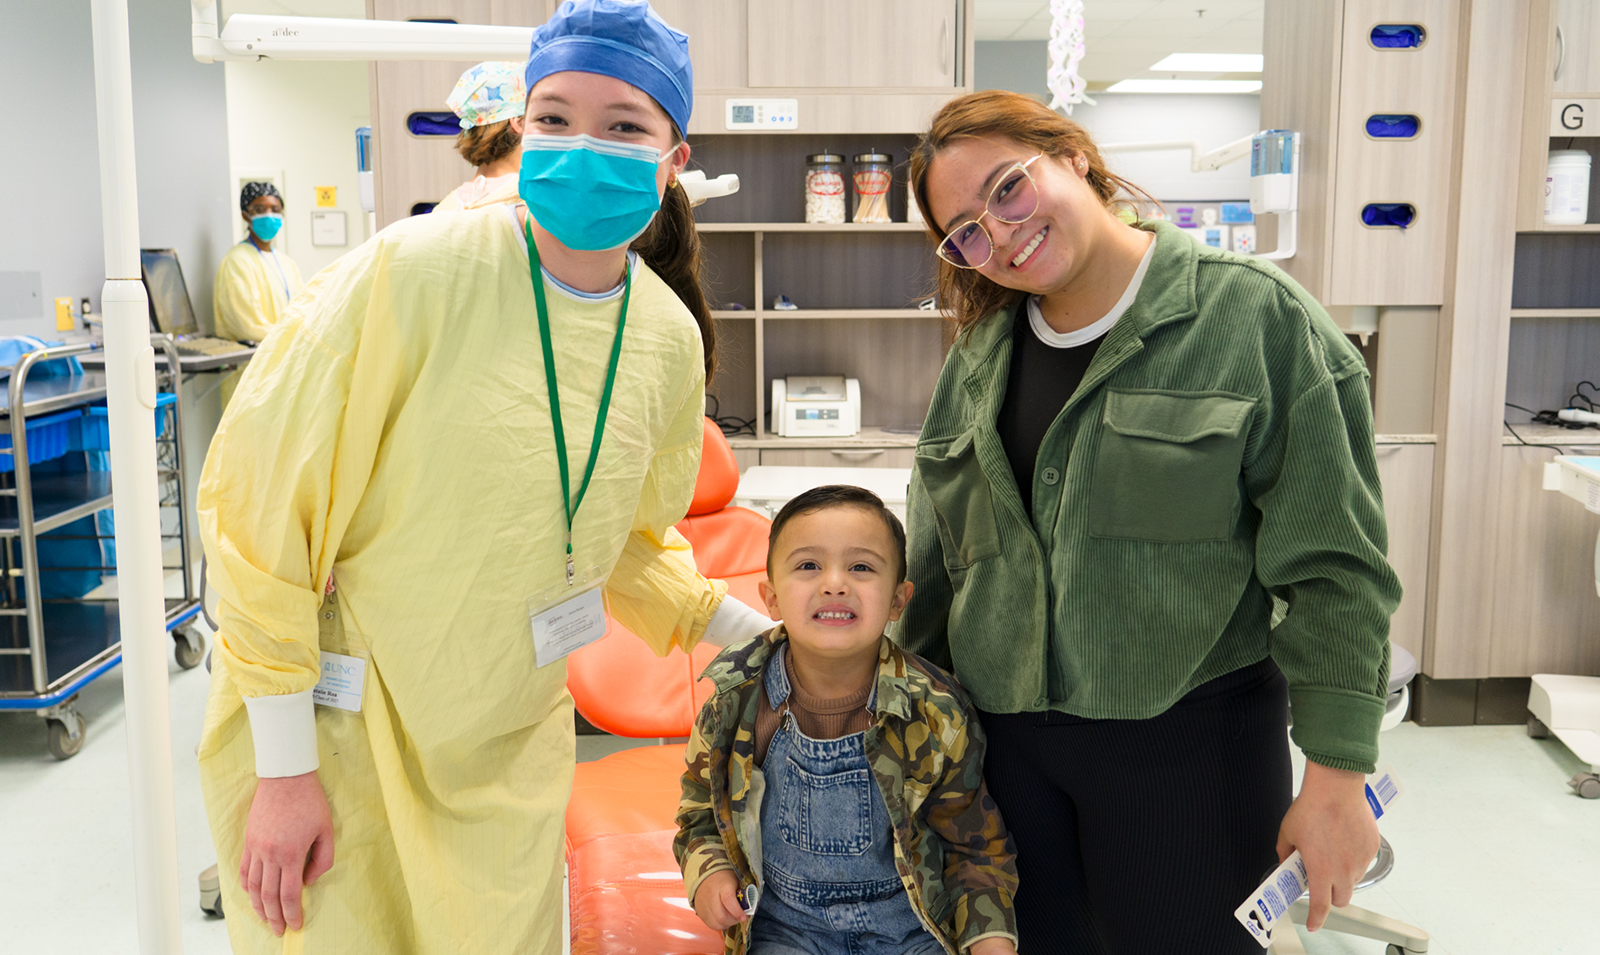 Nurse in scrubs poses with woman in green jacket and smiling child in the middle.